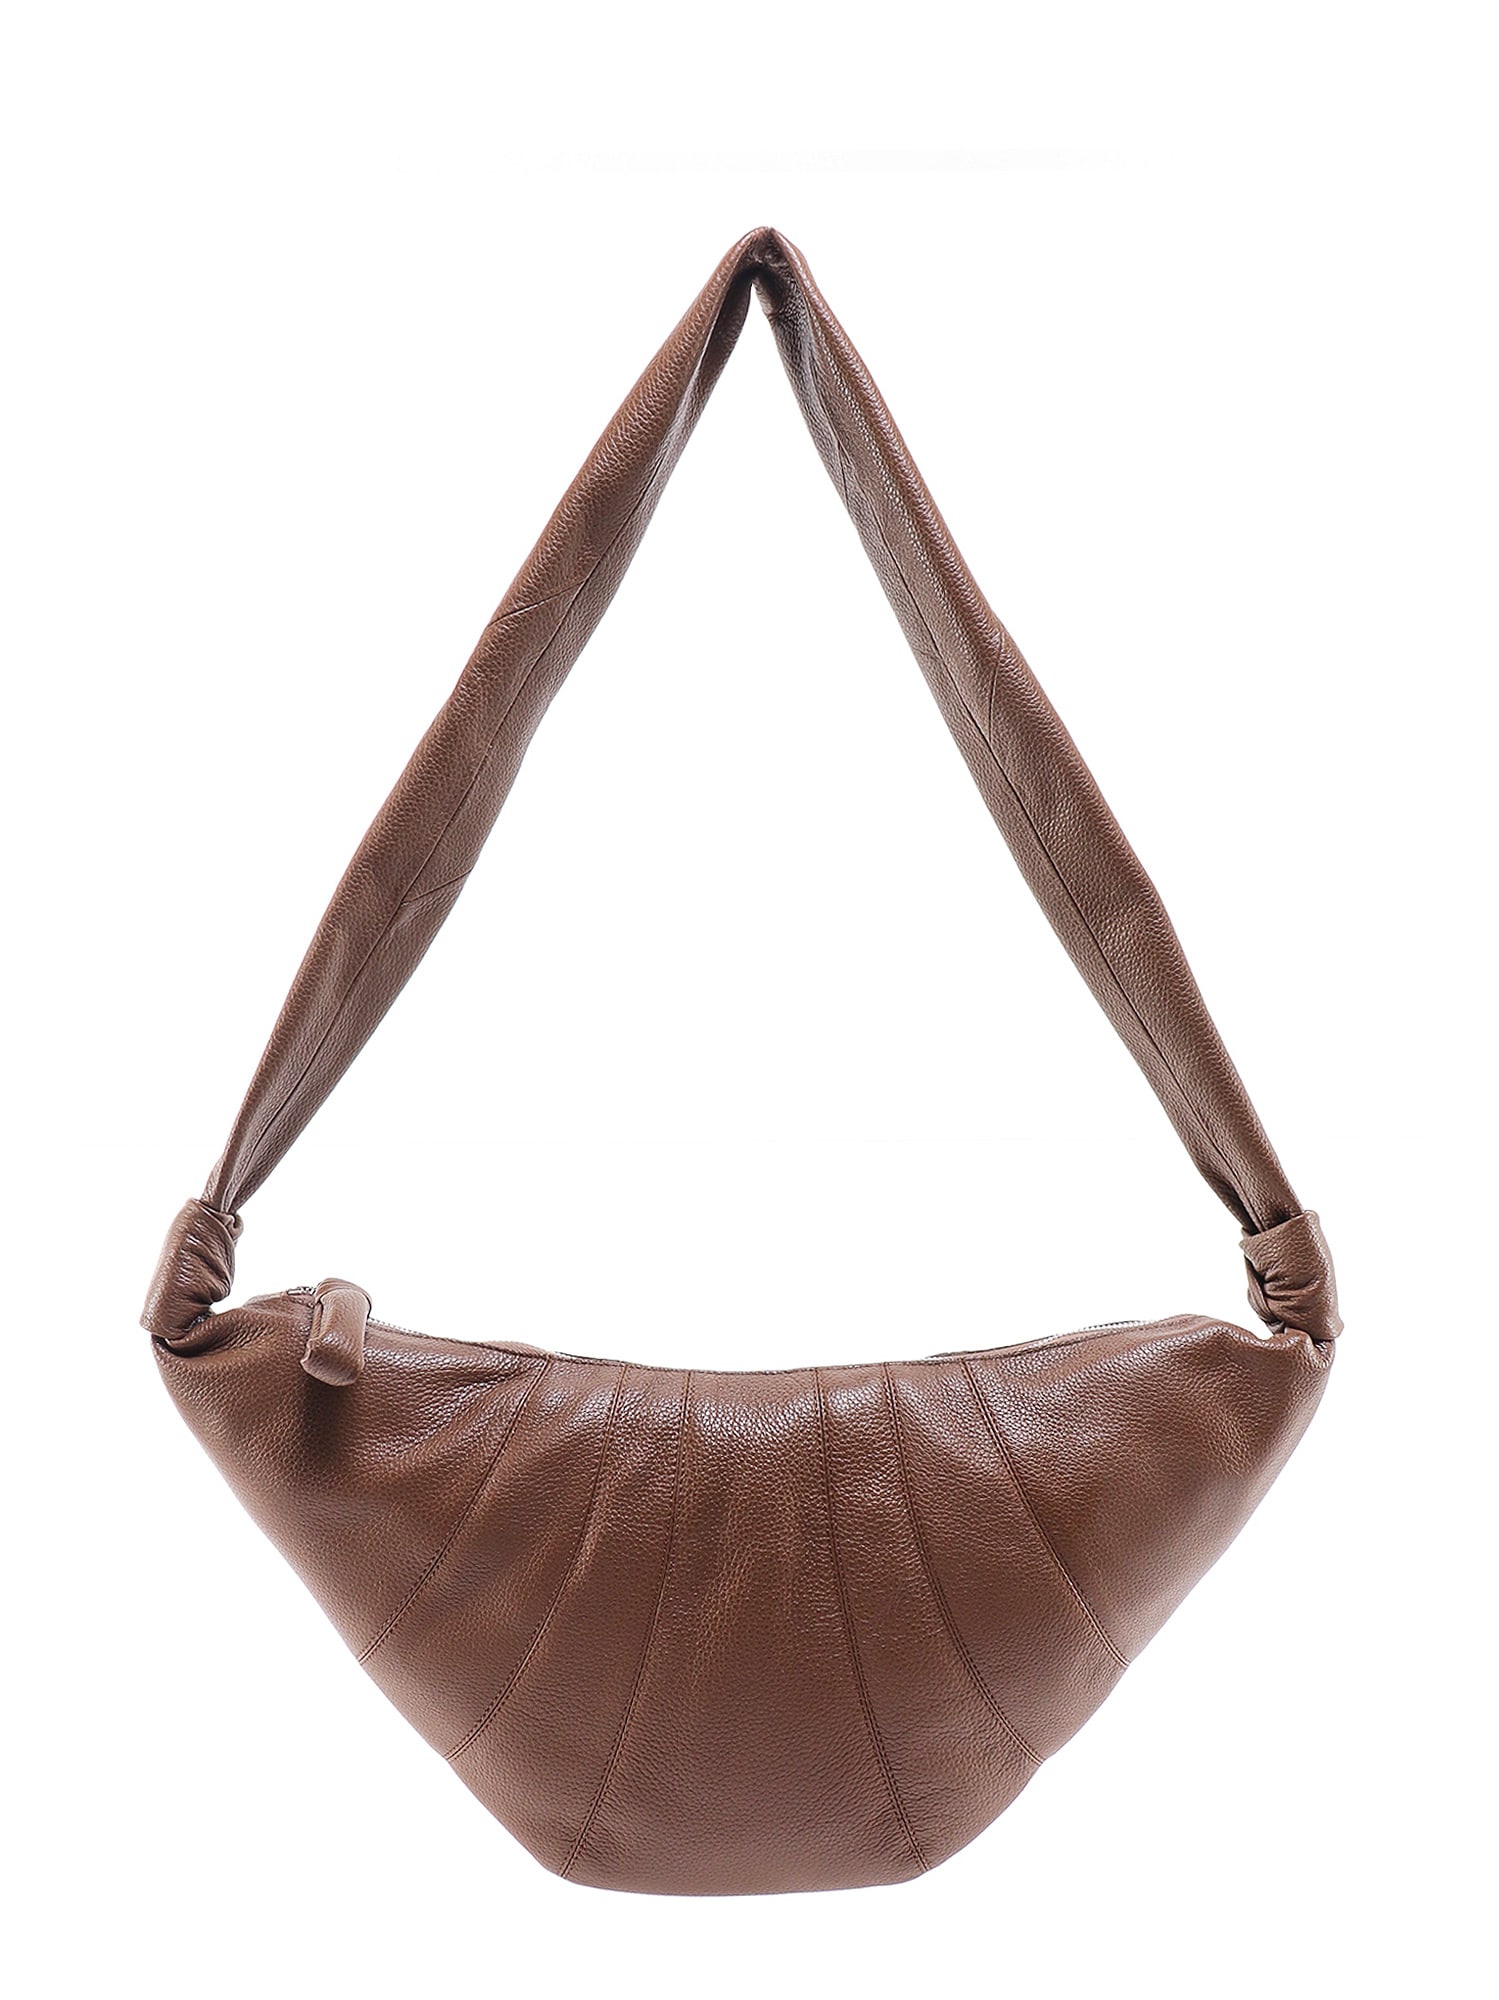 LEMAIRE Bags Sale, Up To 70% Off | ModeSens